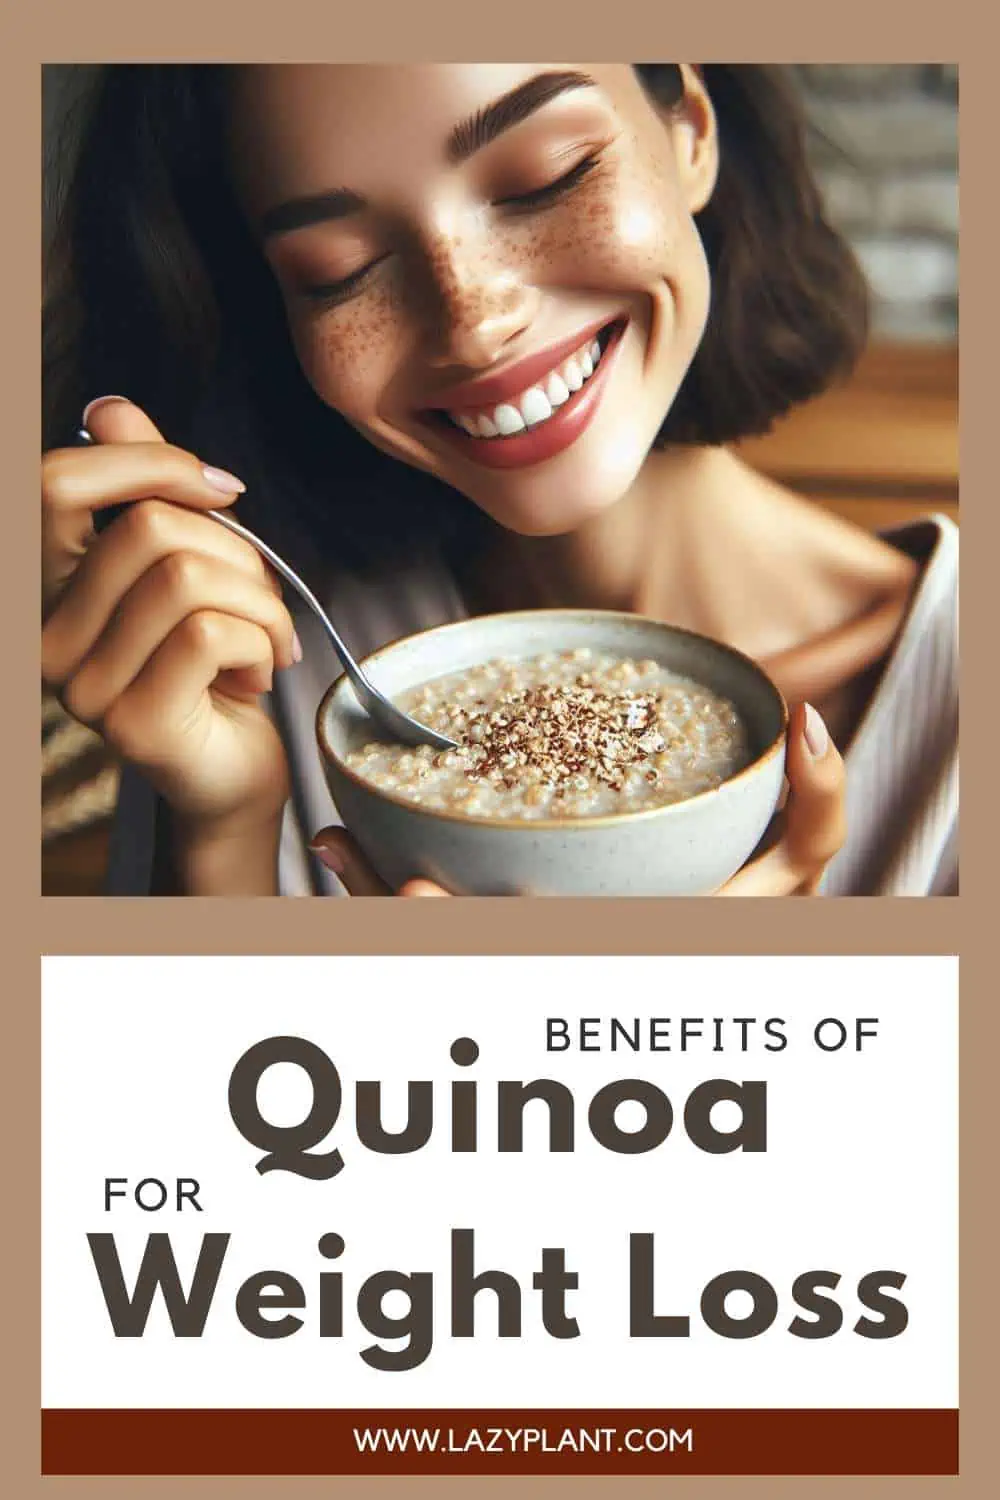 Benefits of eating Quinoa for Weight Loss.